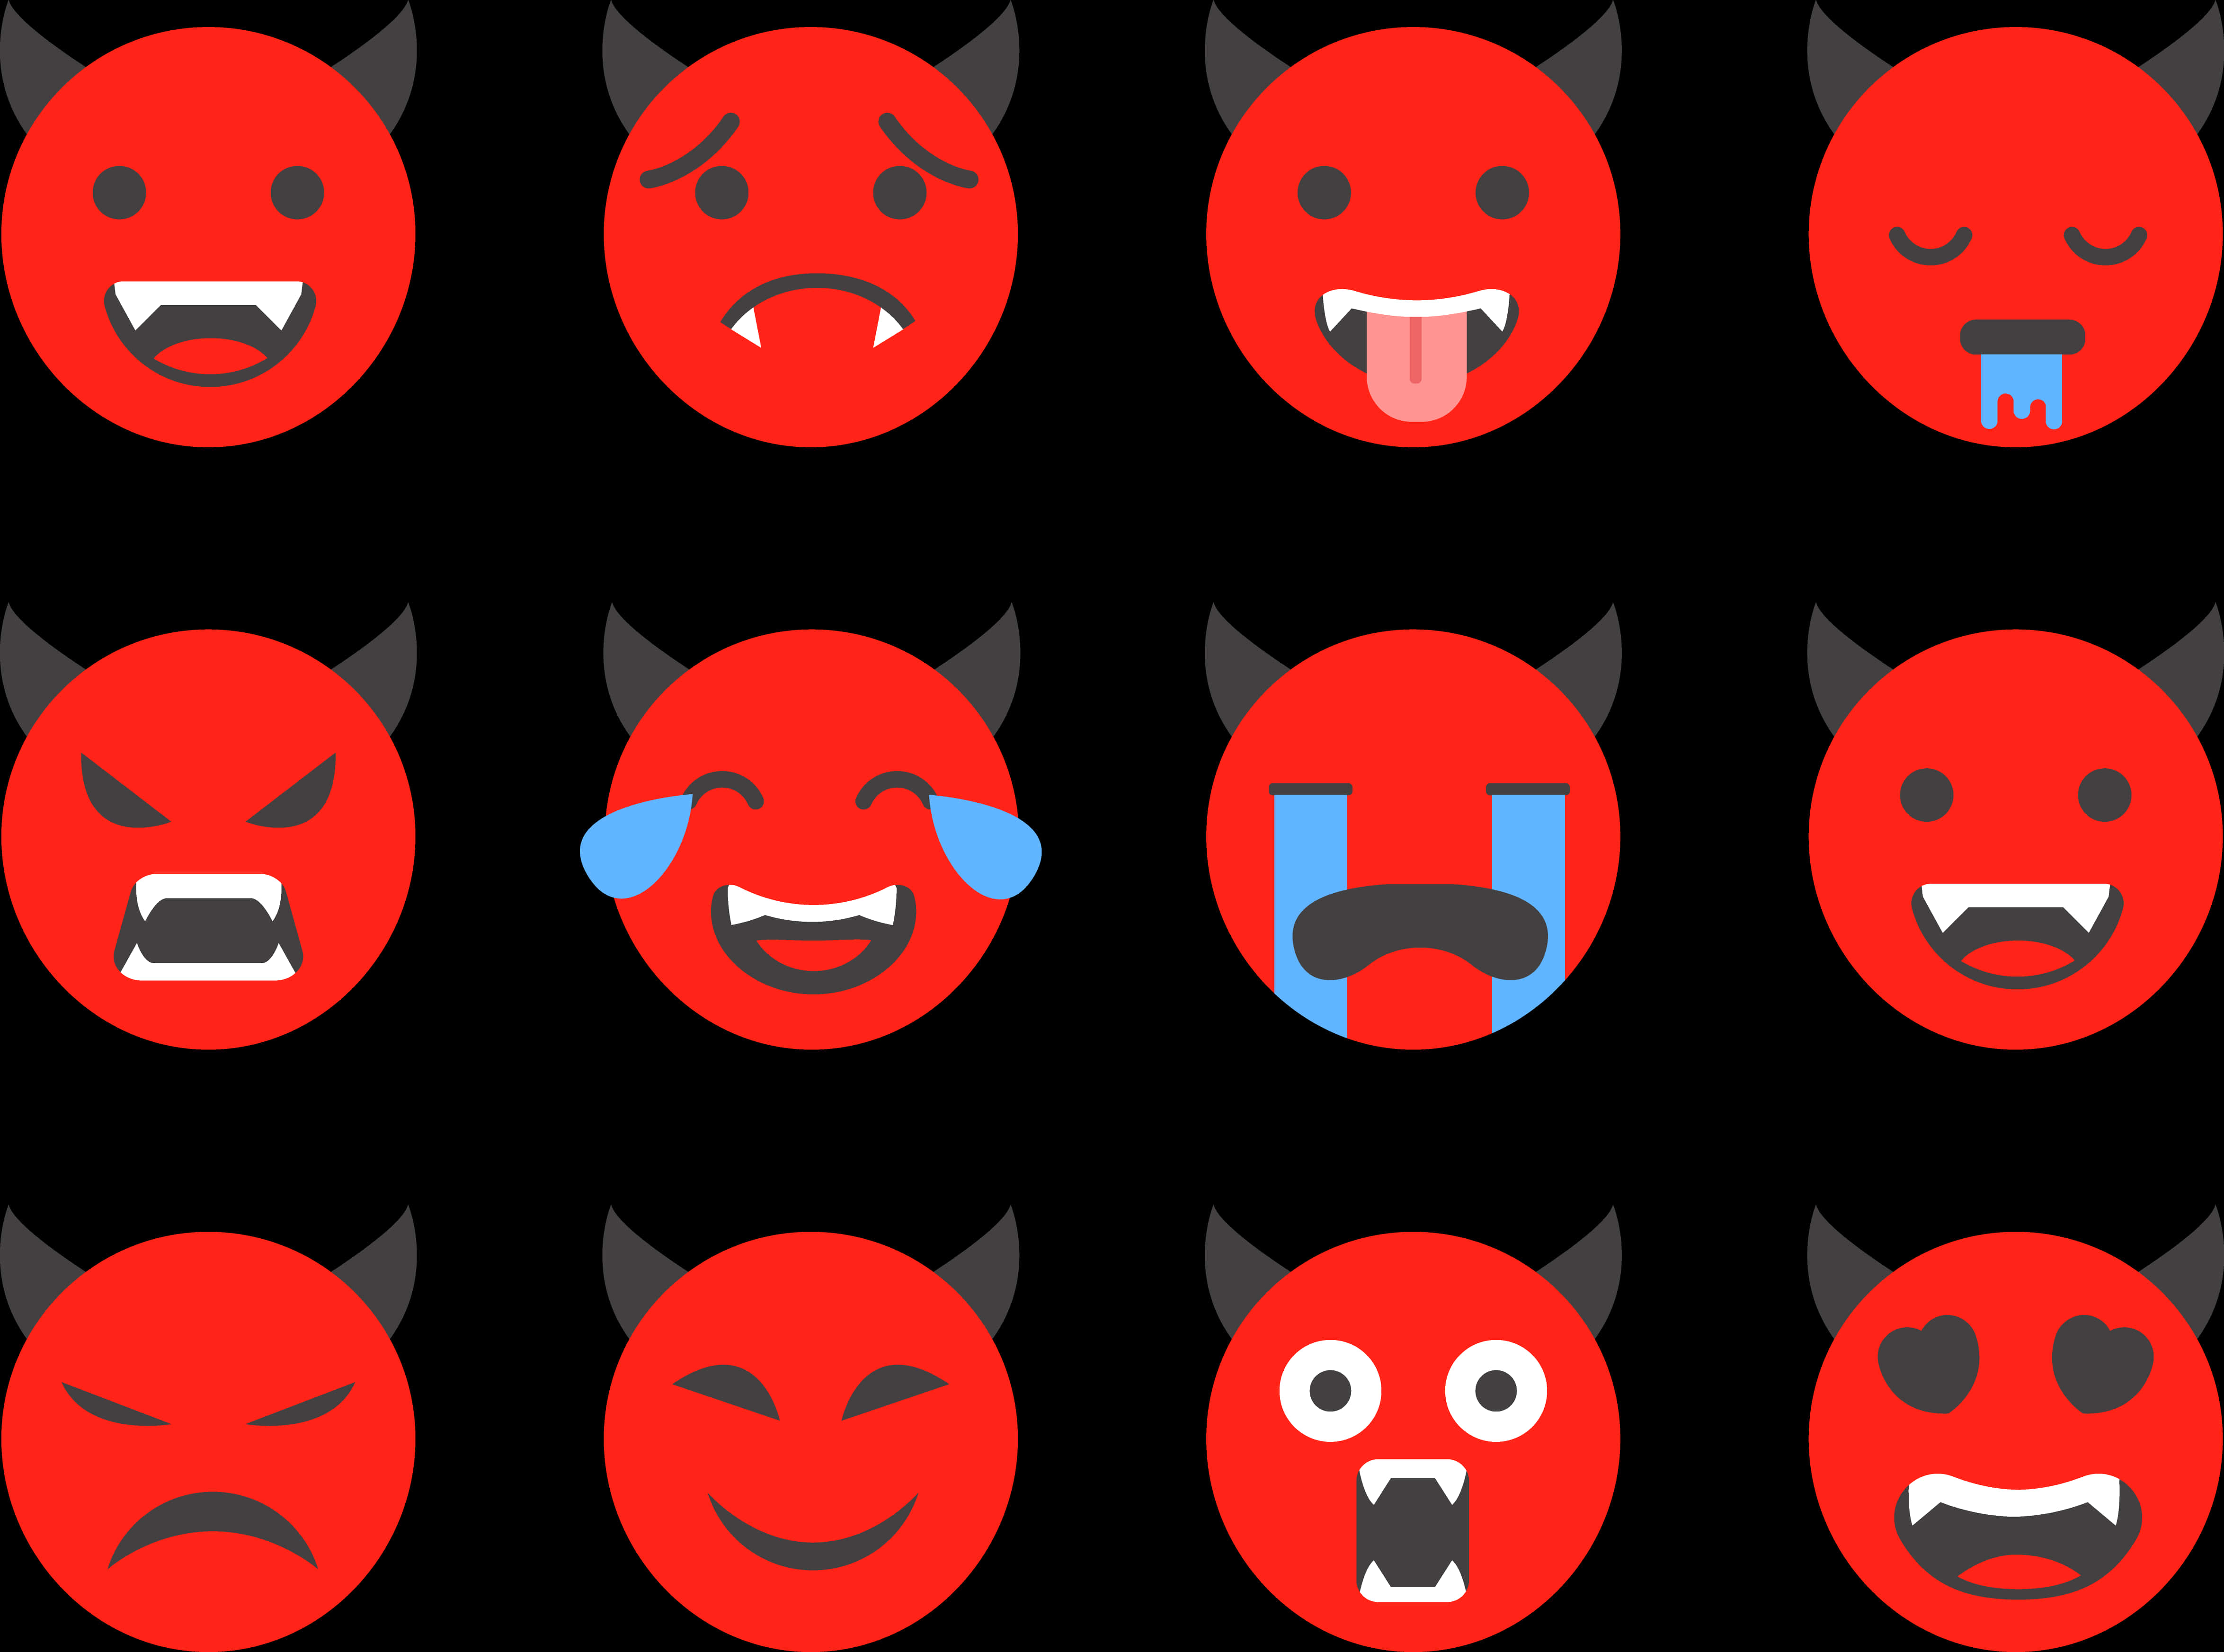 A Set Of Red Emojis With Horns And Teeth